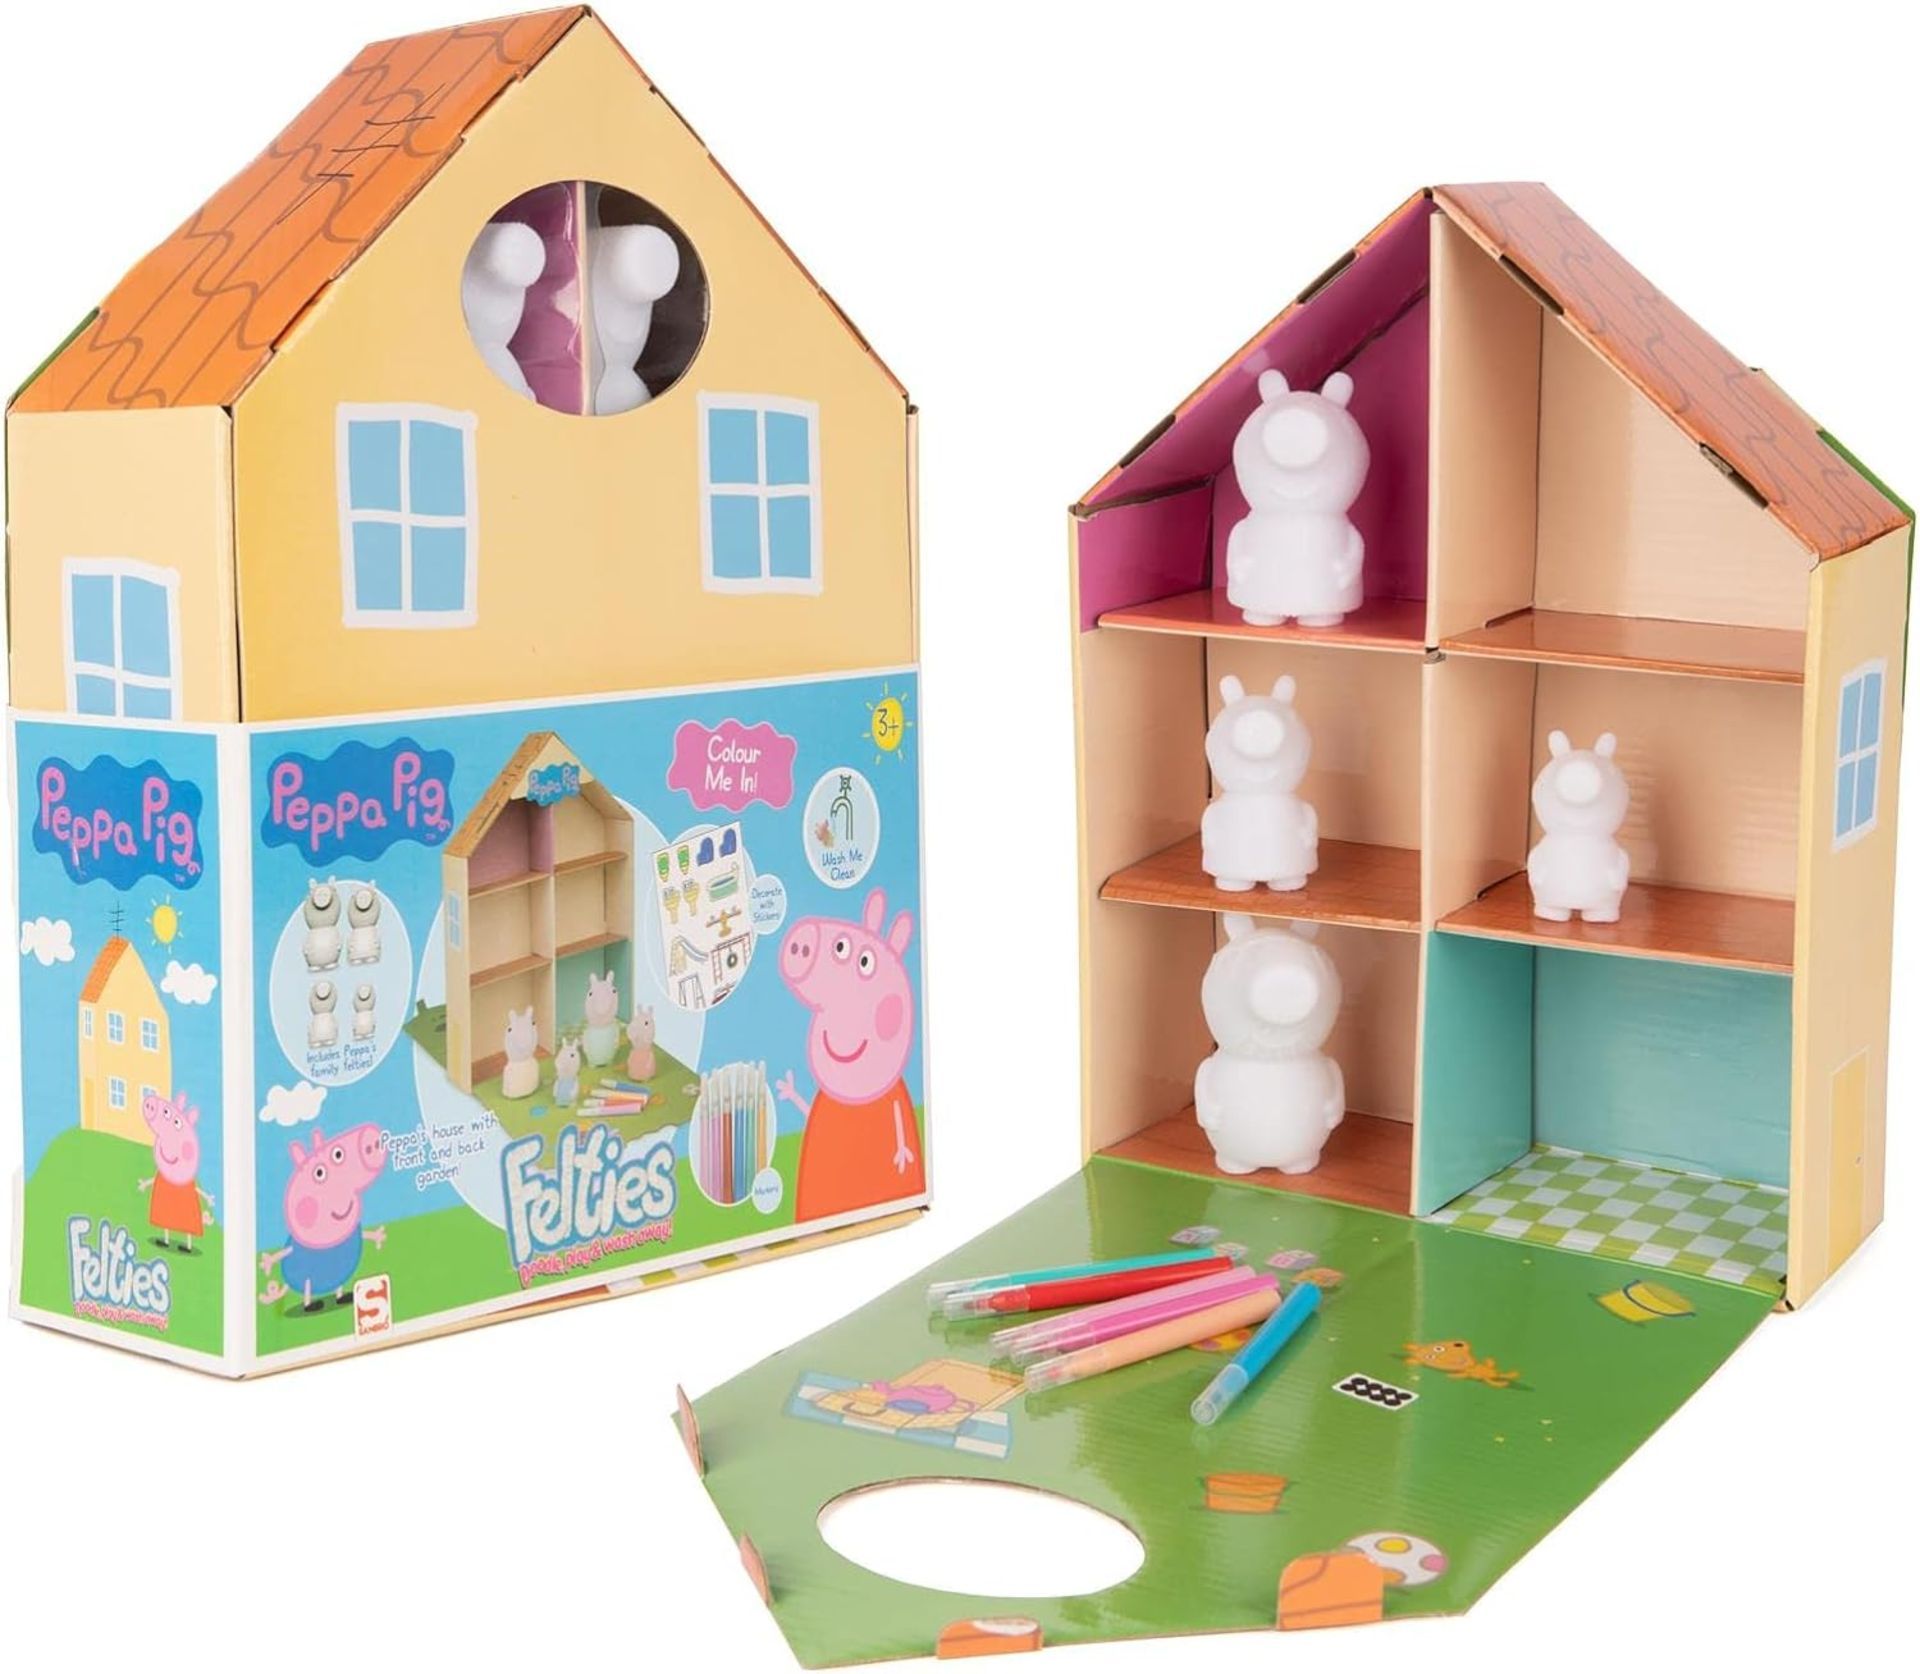 PALLET TO CONTAIN 100 X BRAND NEW PEPPA PIG FELTIES HOUSES RRP £18 EACH